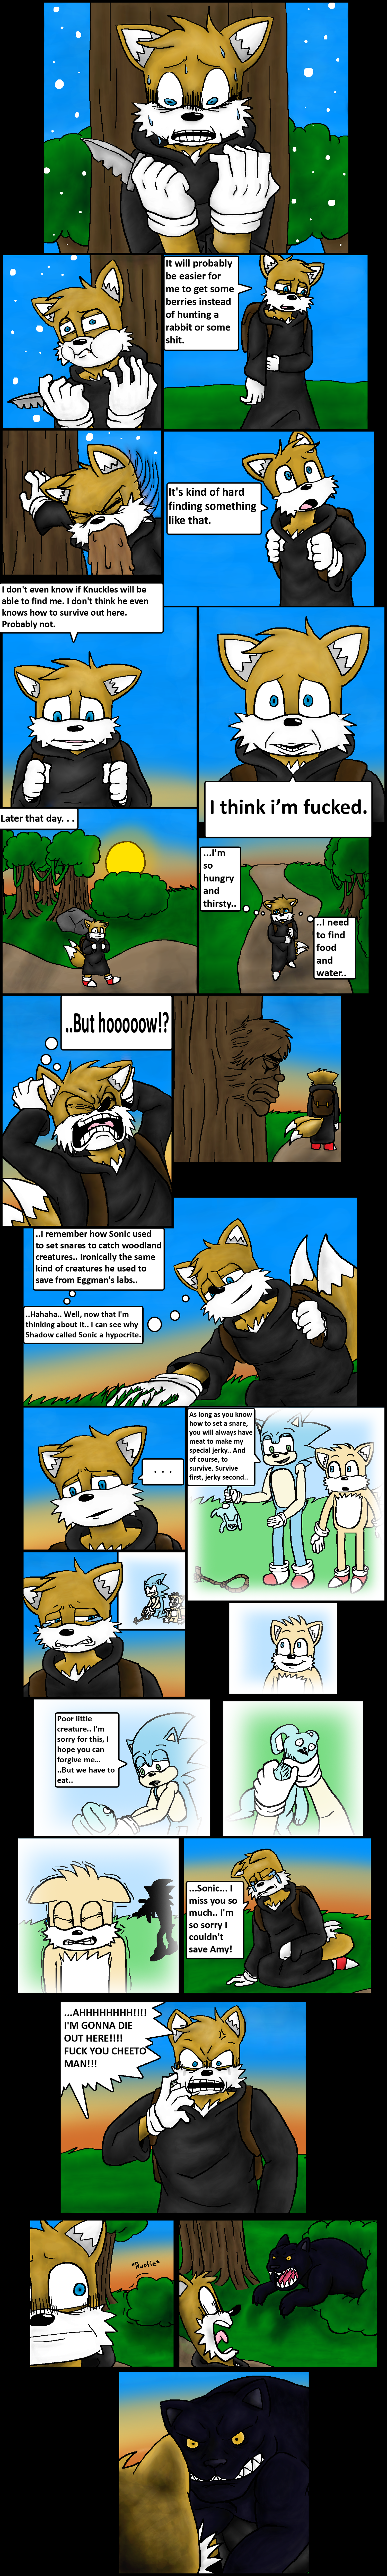 ch26/pg27.png. If you're seeing this, enable images. Or, perhaps we have a website issue. Try refreshing, if unsuccessful email commodorian@tailsgetstrolled.org with a detailed description of how you got here.